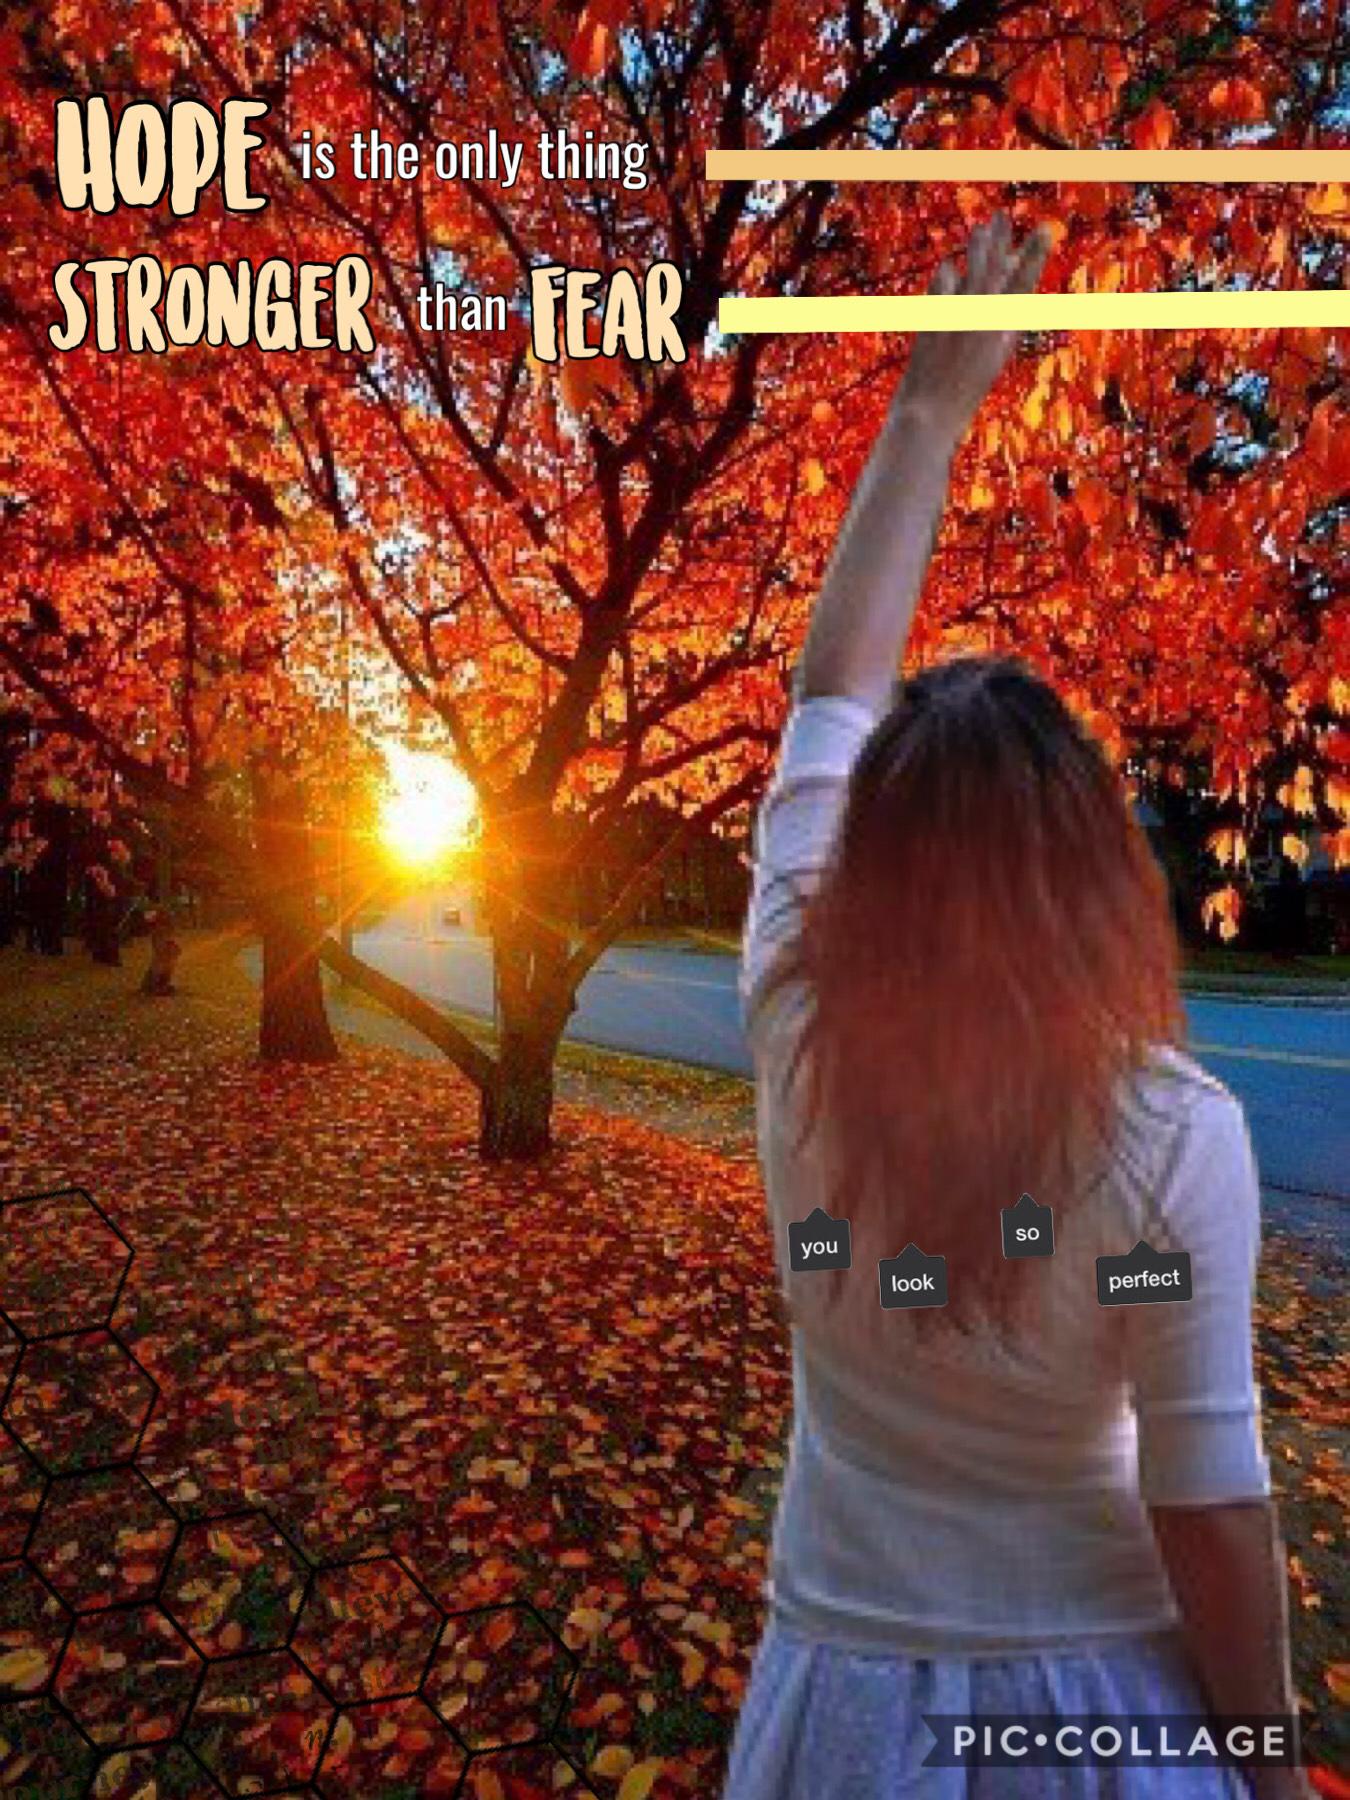 Hope is the only thing stronger than fear 🧡💛❤️ credits to @katig329